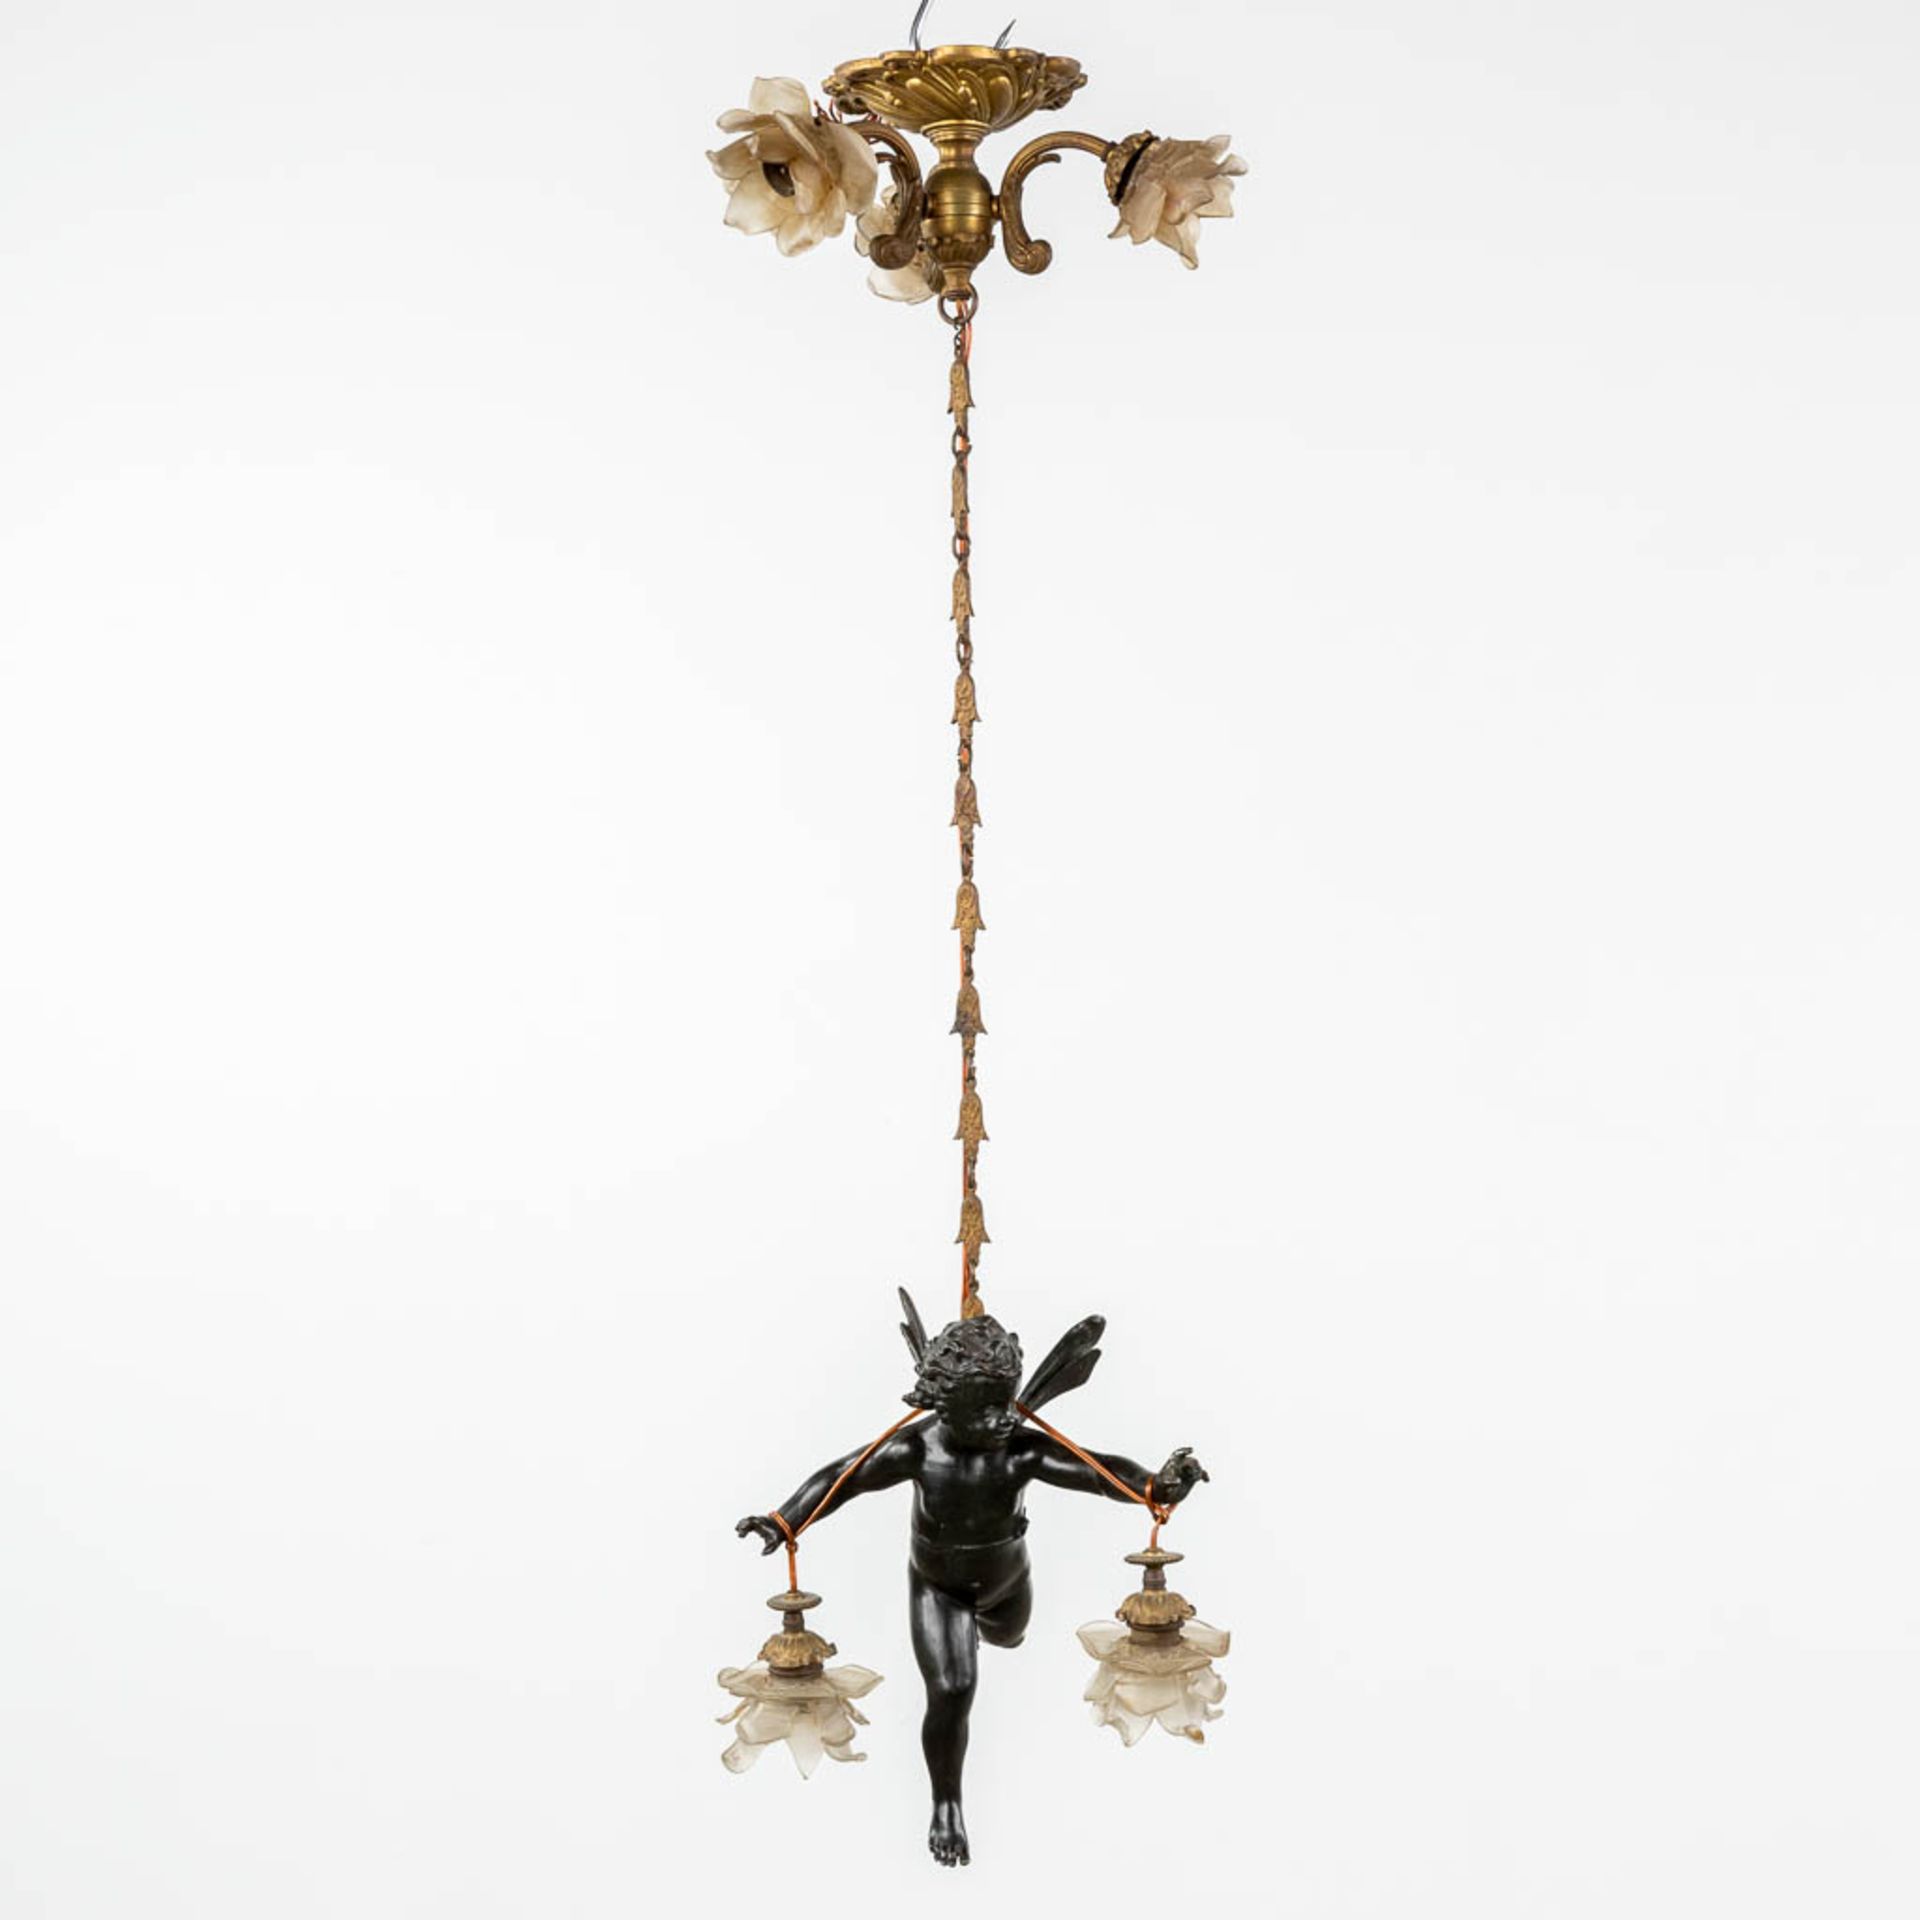 A hall lamp with a putto figurine, patinated bronze. Circa 1900. (W: 34 x H: 105 cm) - Image 6 of 10